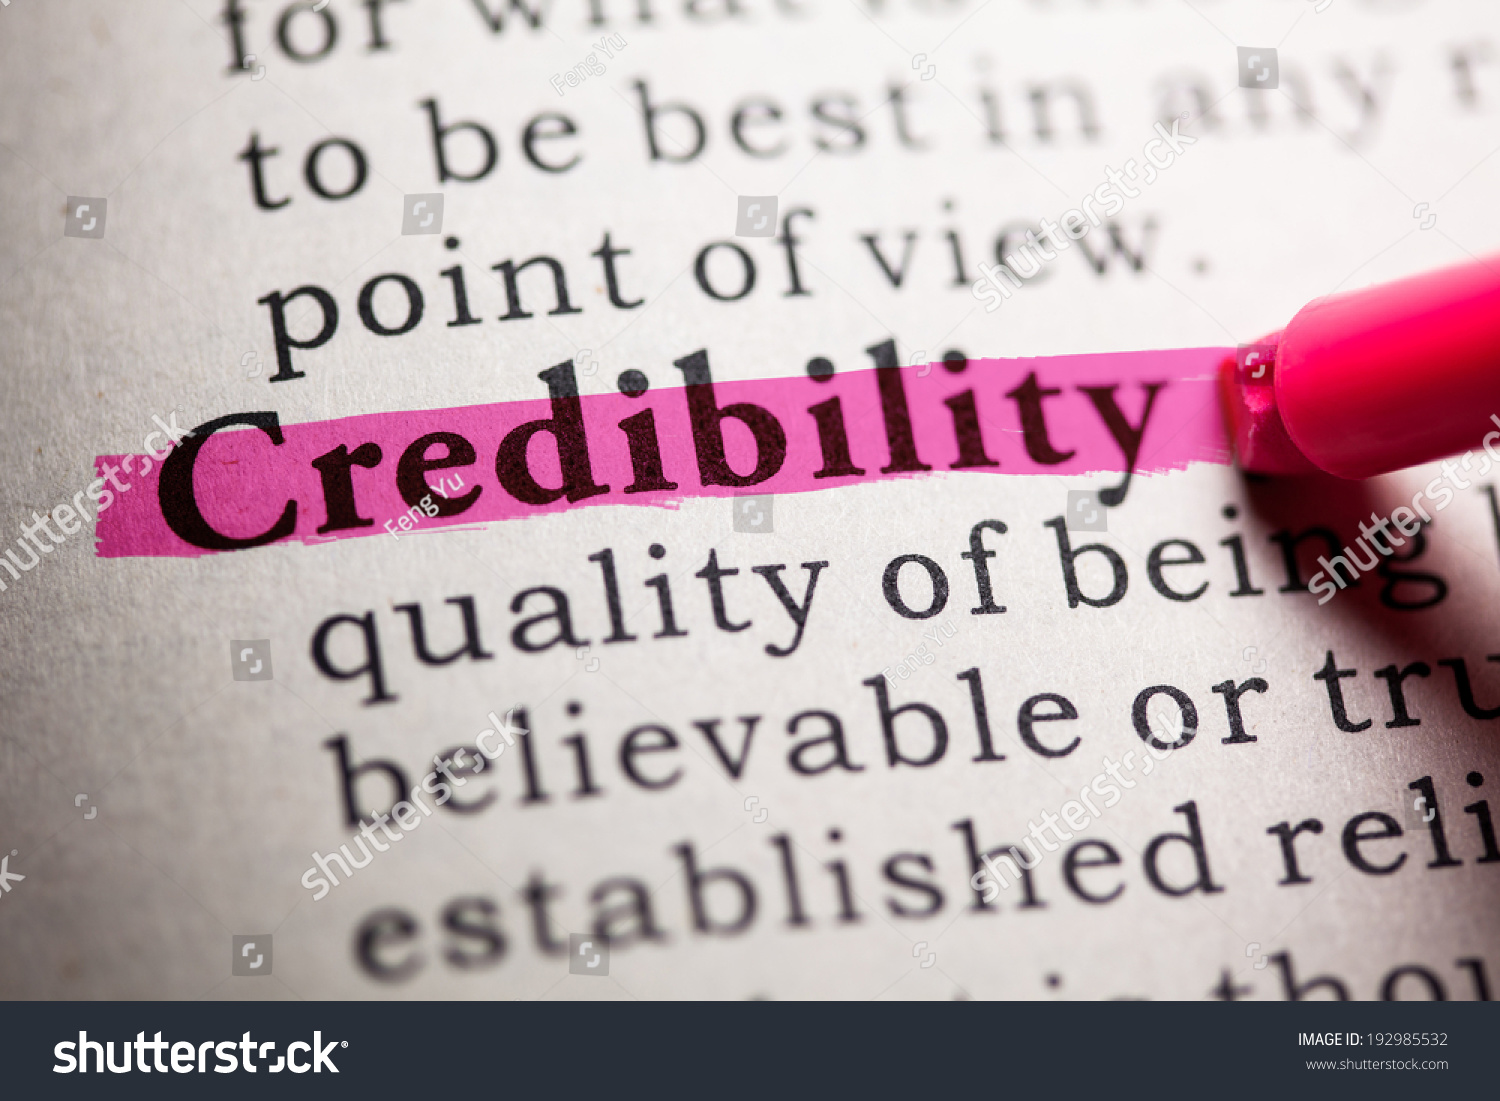 Image result for image for the word credibility